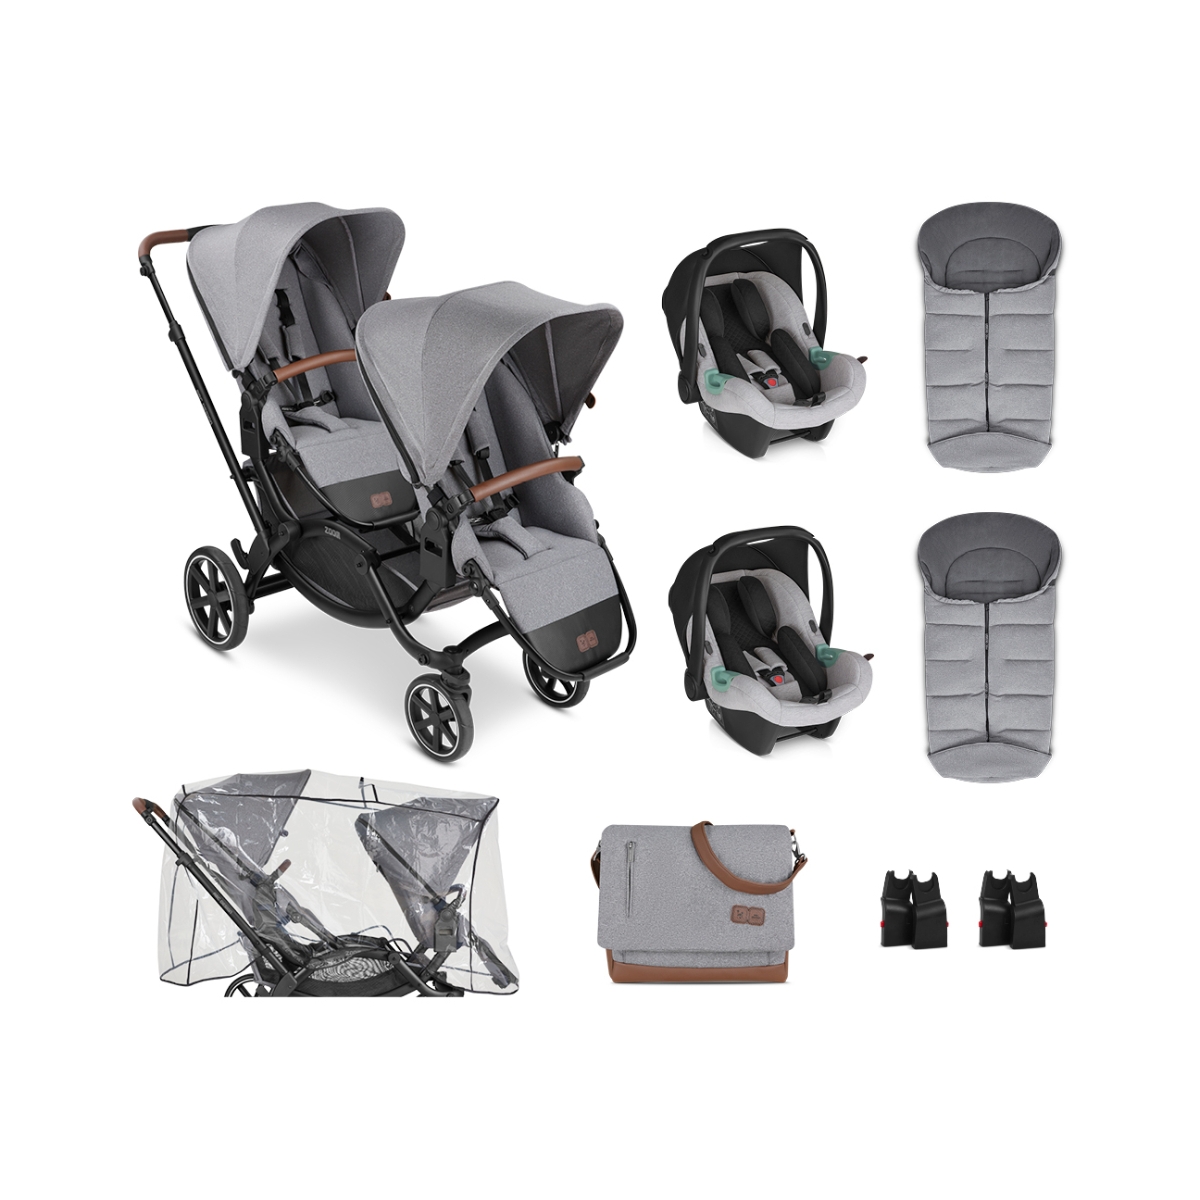 ABC Design Zoom 2in1 Travel System Bundle